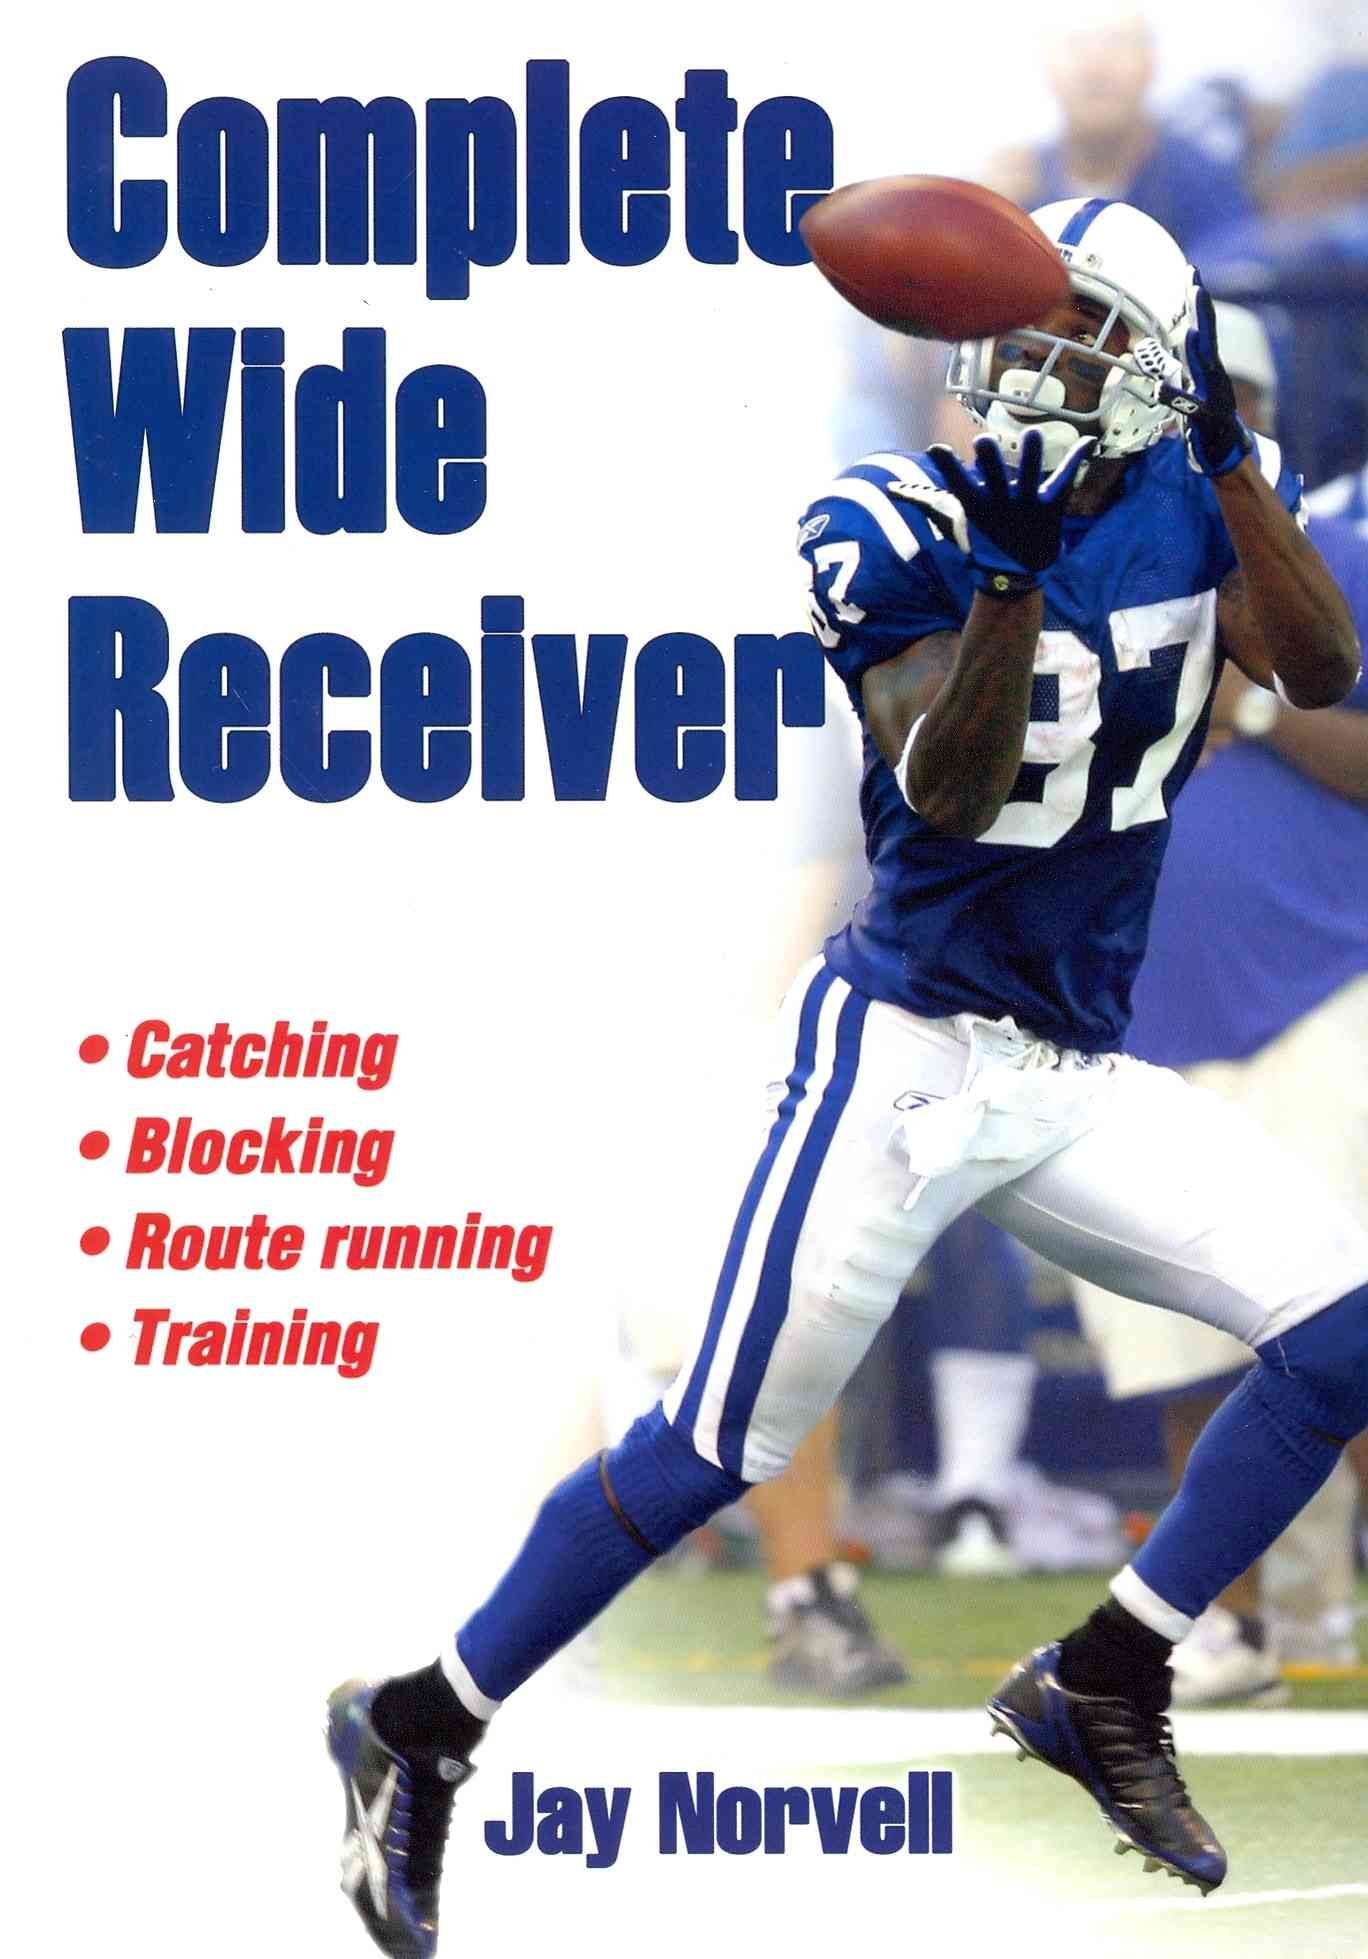 Complete Wide Receiver